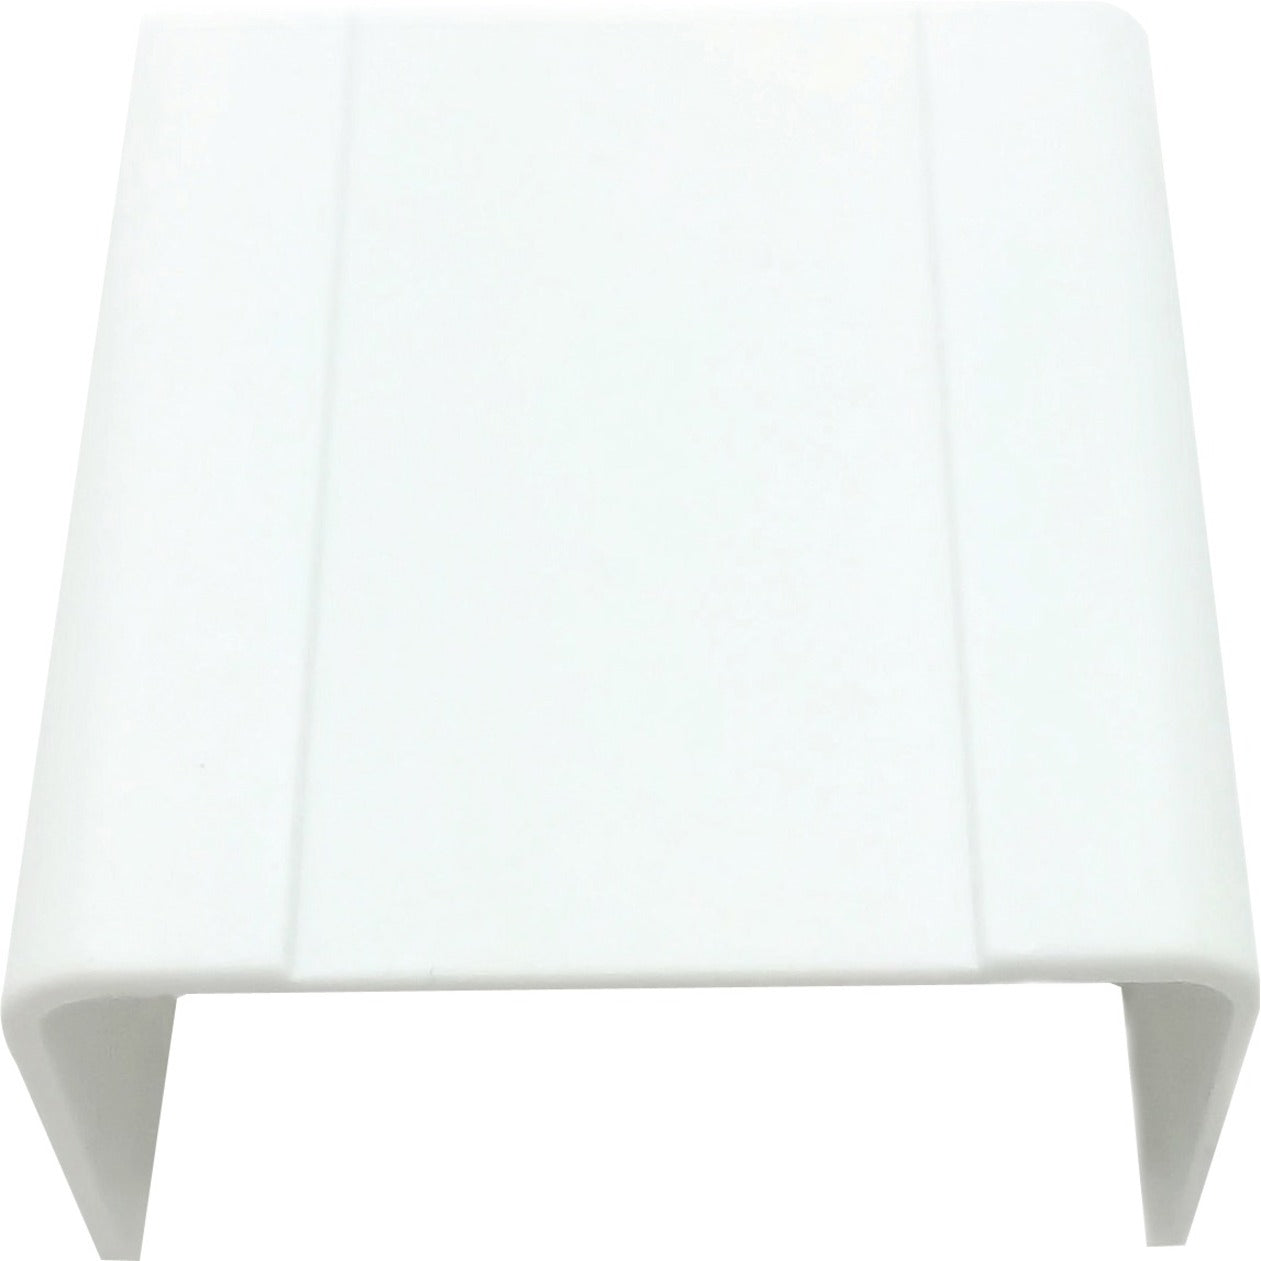 W Box 175JCW4 1-3/4" X 1" Joint Cover White 4 Pack, Cable Routing Solution